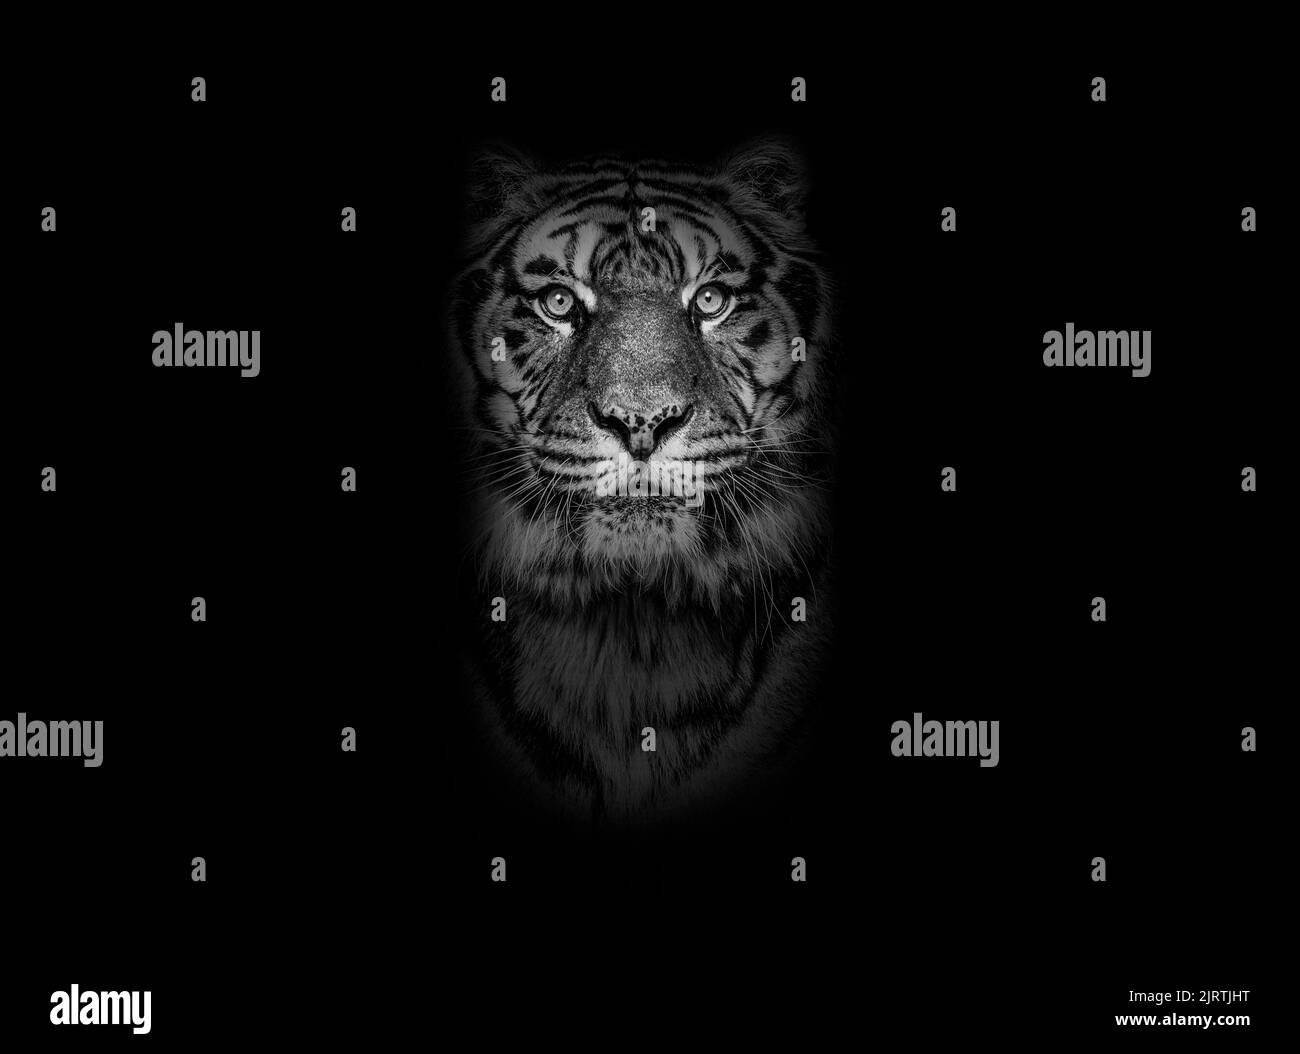 Black and white portrait of a Tiger looking at the camera on a black background Stock Photo